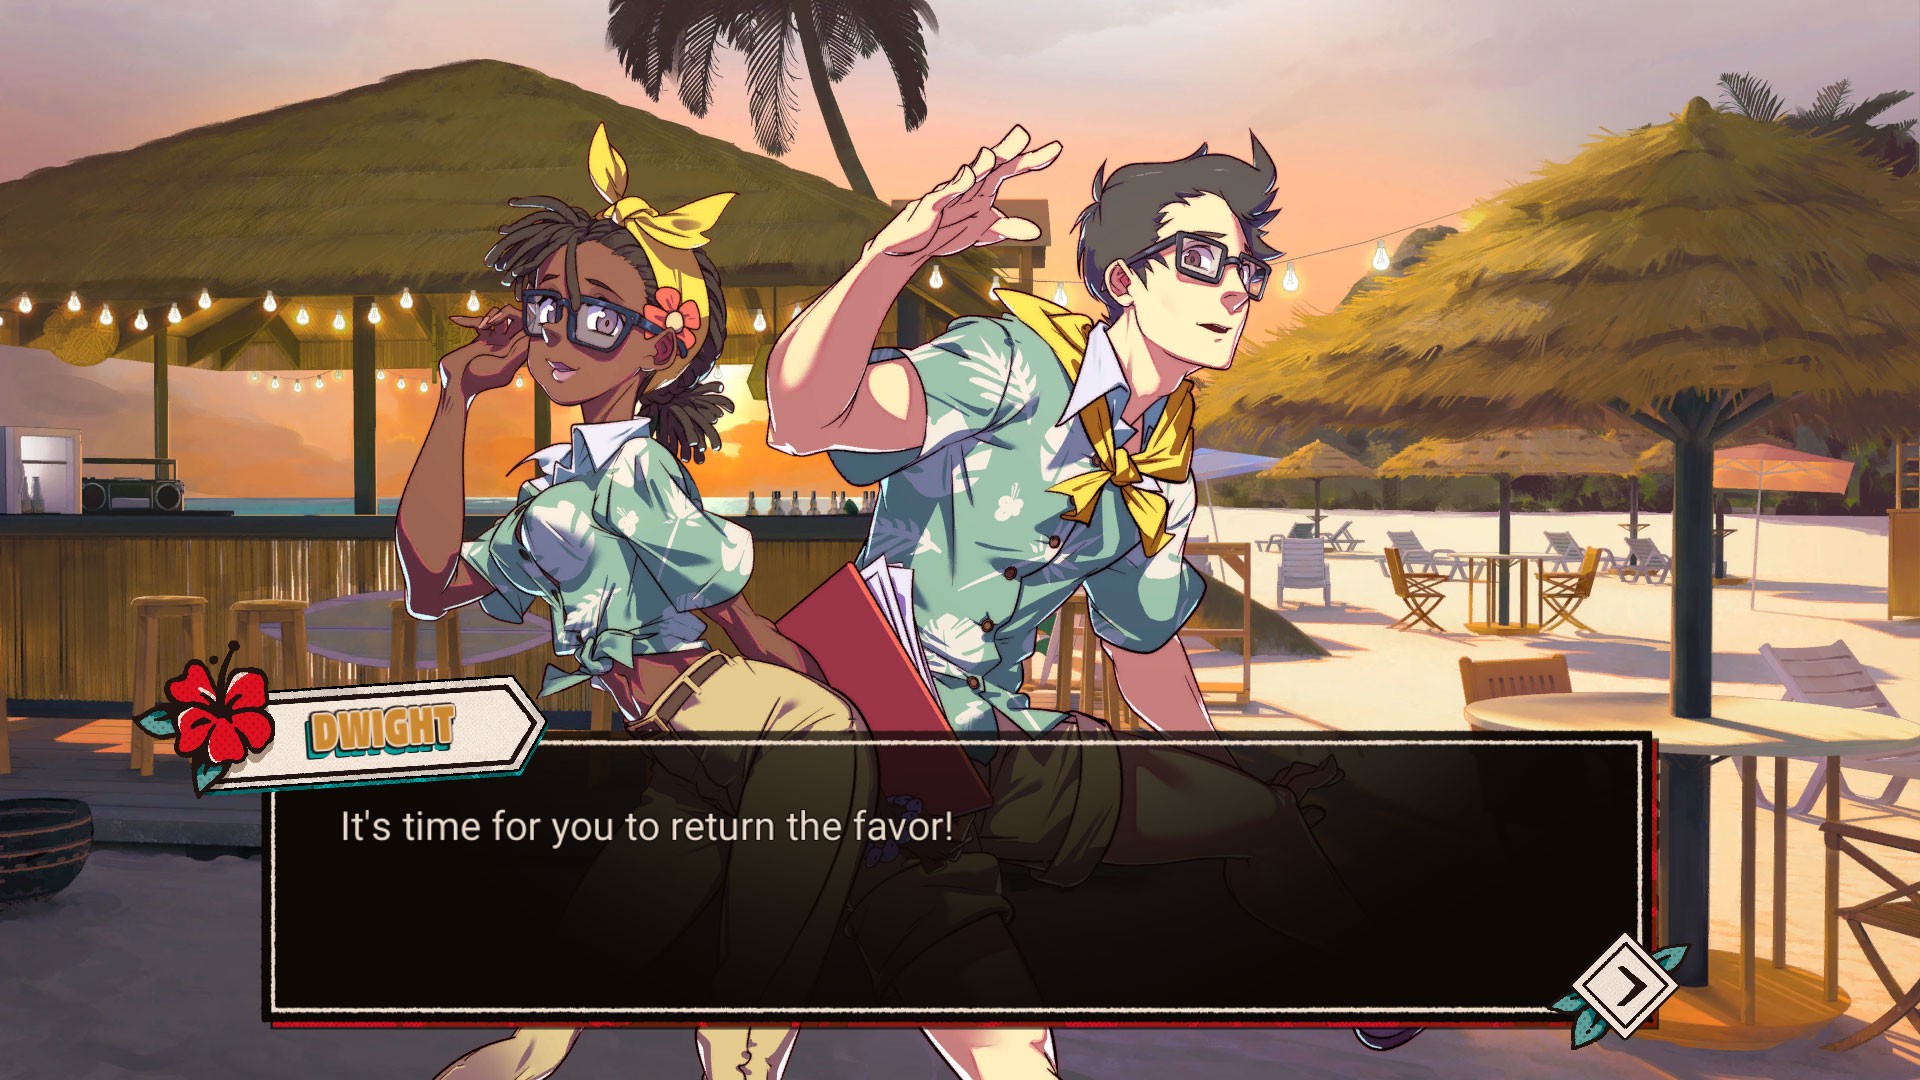 Hooked on You A DBD Dating Sim Android & iOS 